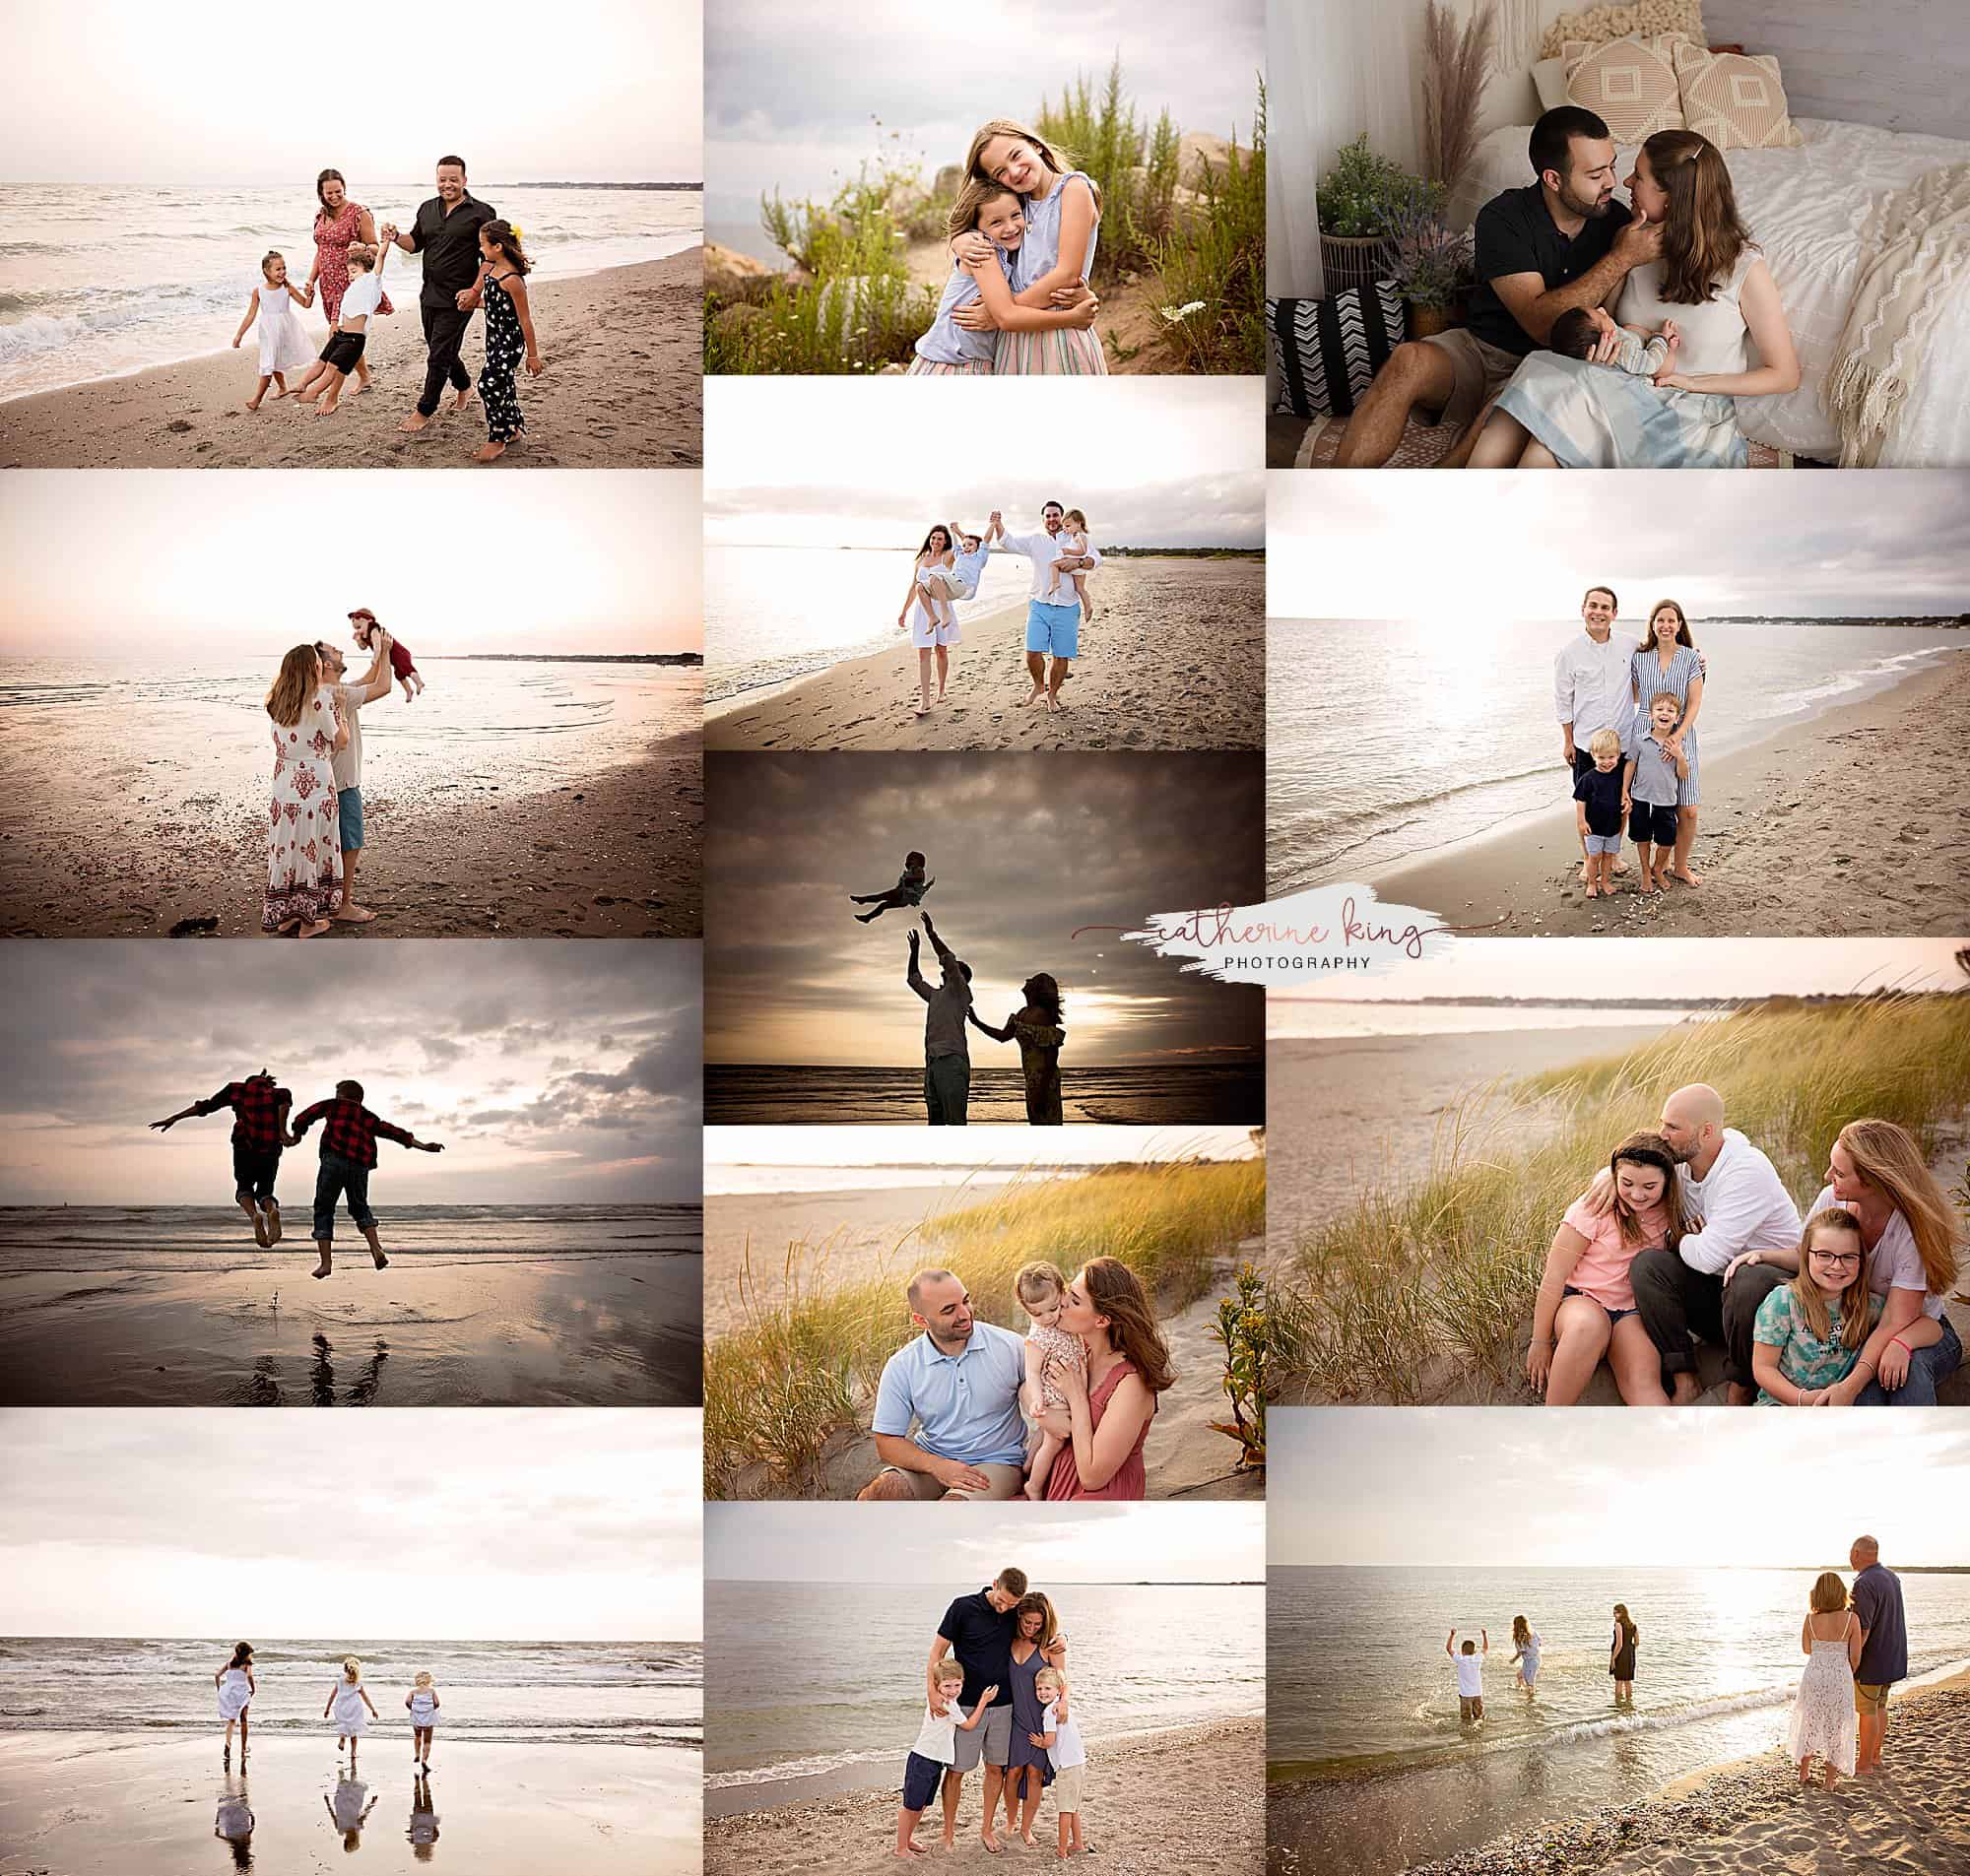 Unposed posing in family photography - creating authentic moments while keeping your clients looking great